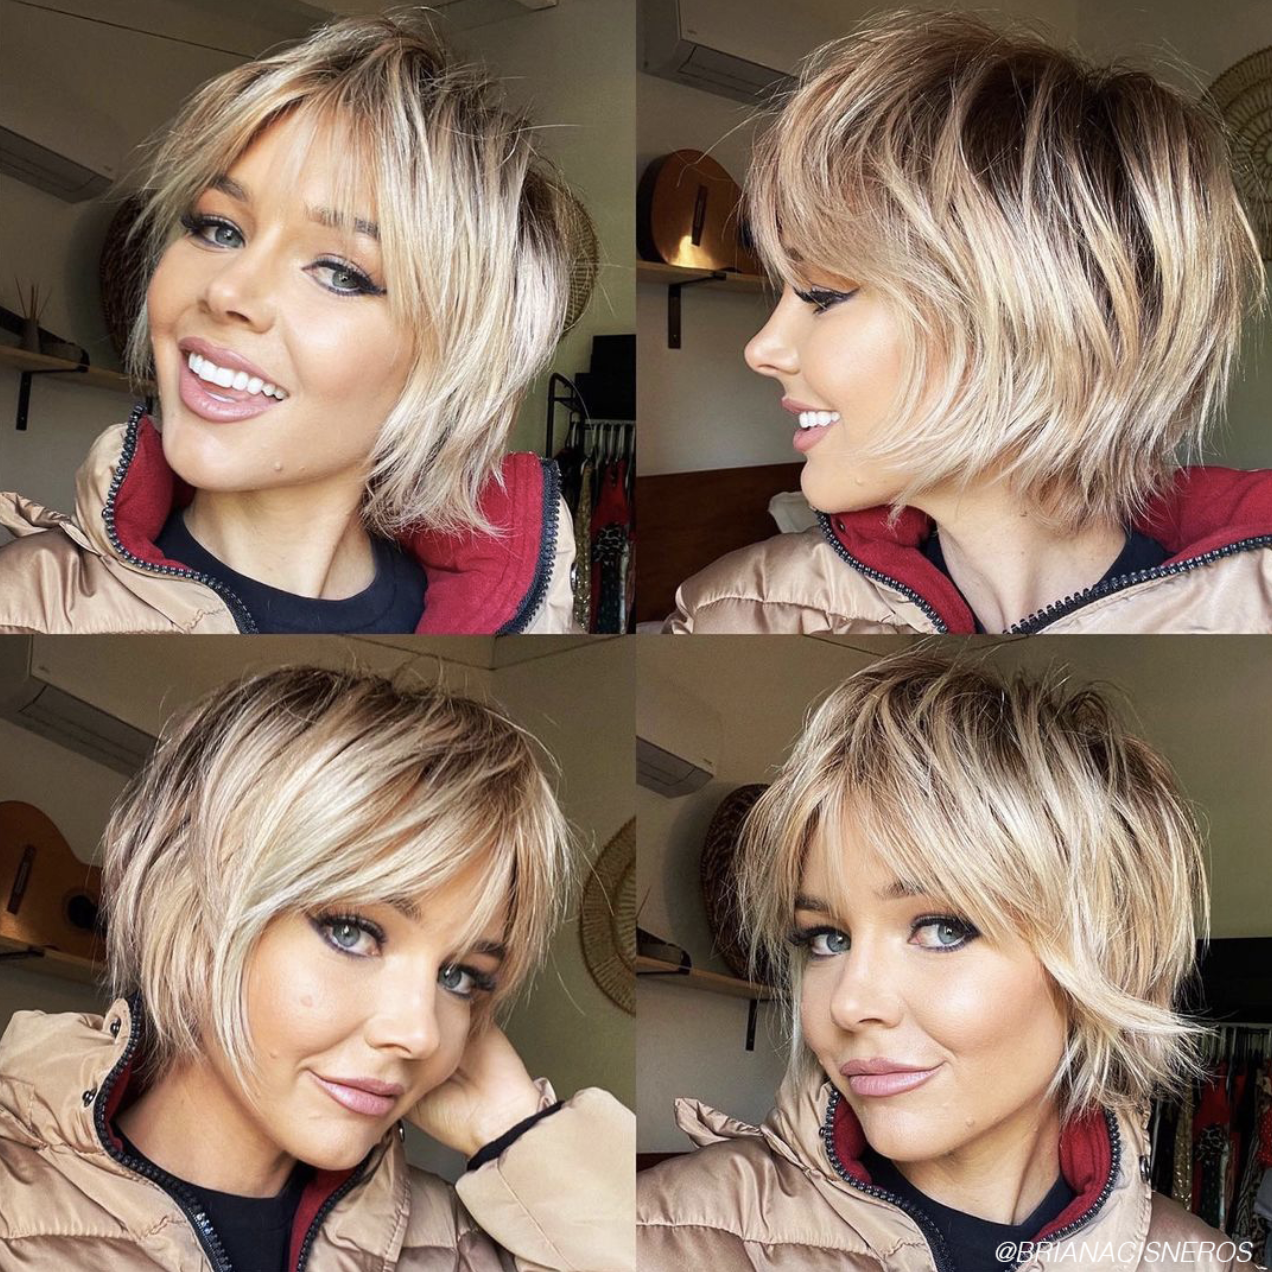 5 Trending Haircuts to Ask For This Fall - Bangstyle - House of Hair  Inspiration